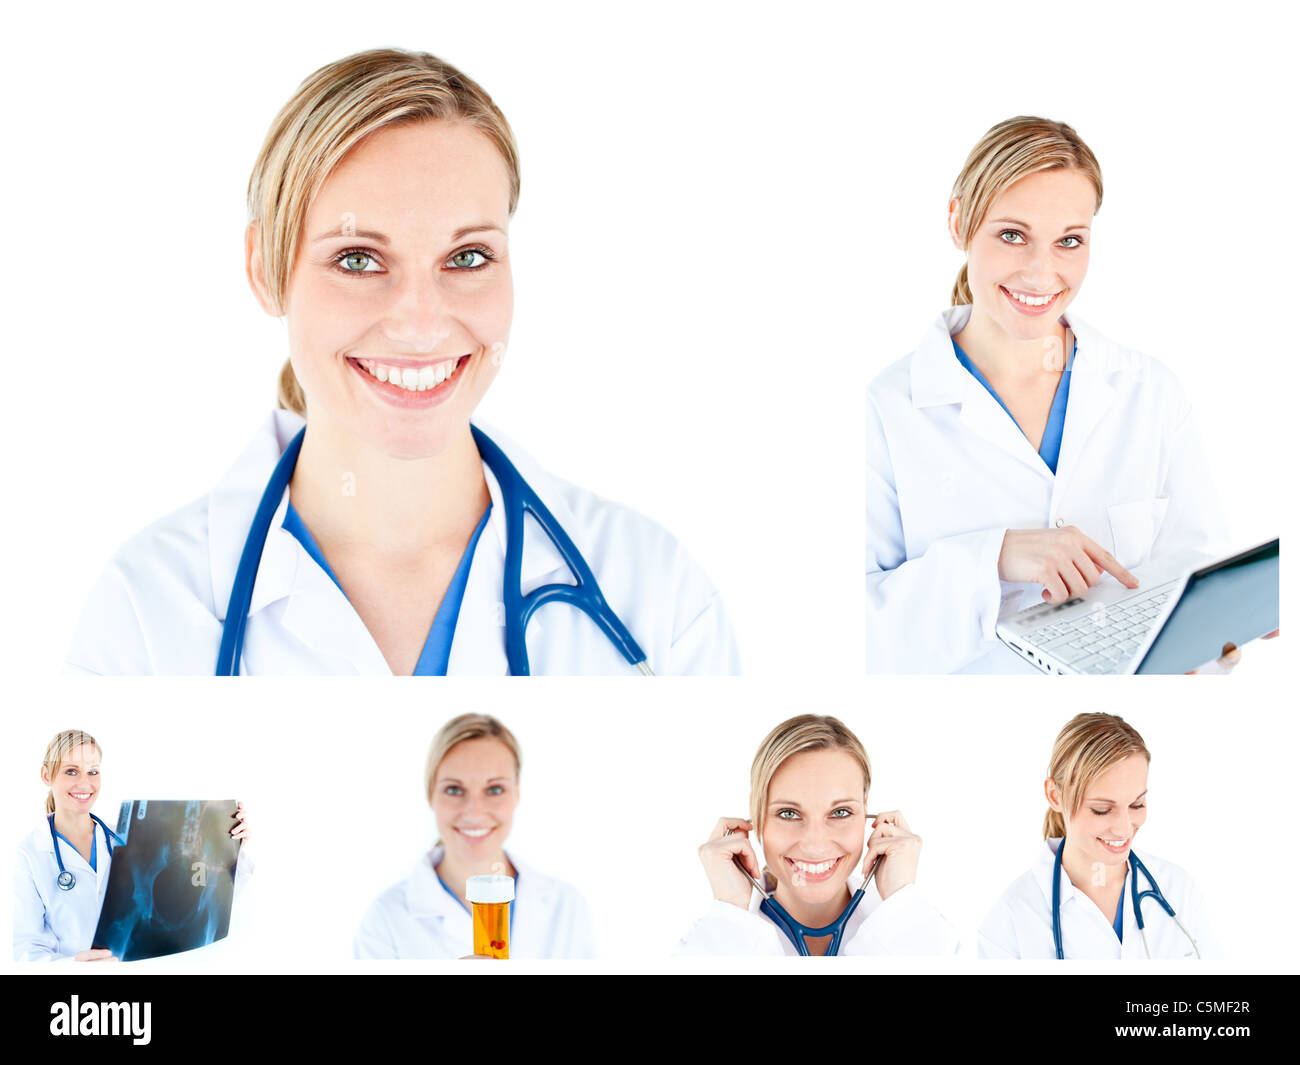 Collage of a female scientist using a stethoscope Stock Photo